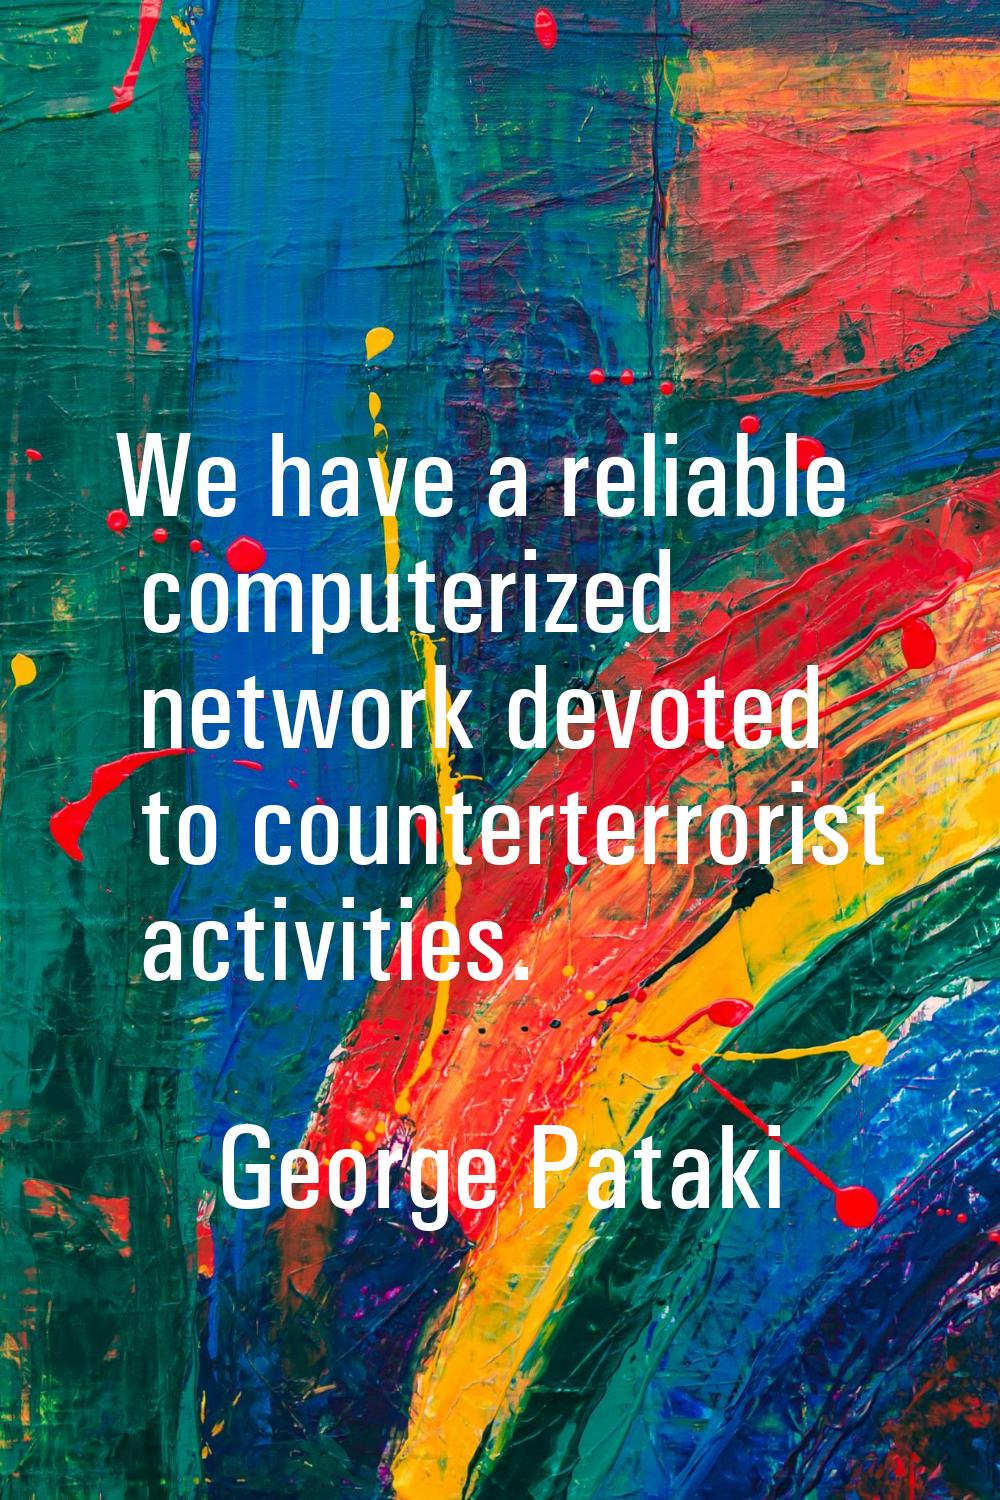 We have a reliable computerized network devoted to counterterrorist activities.